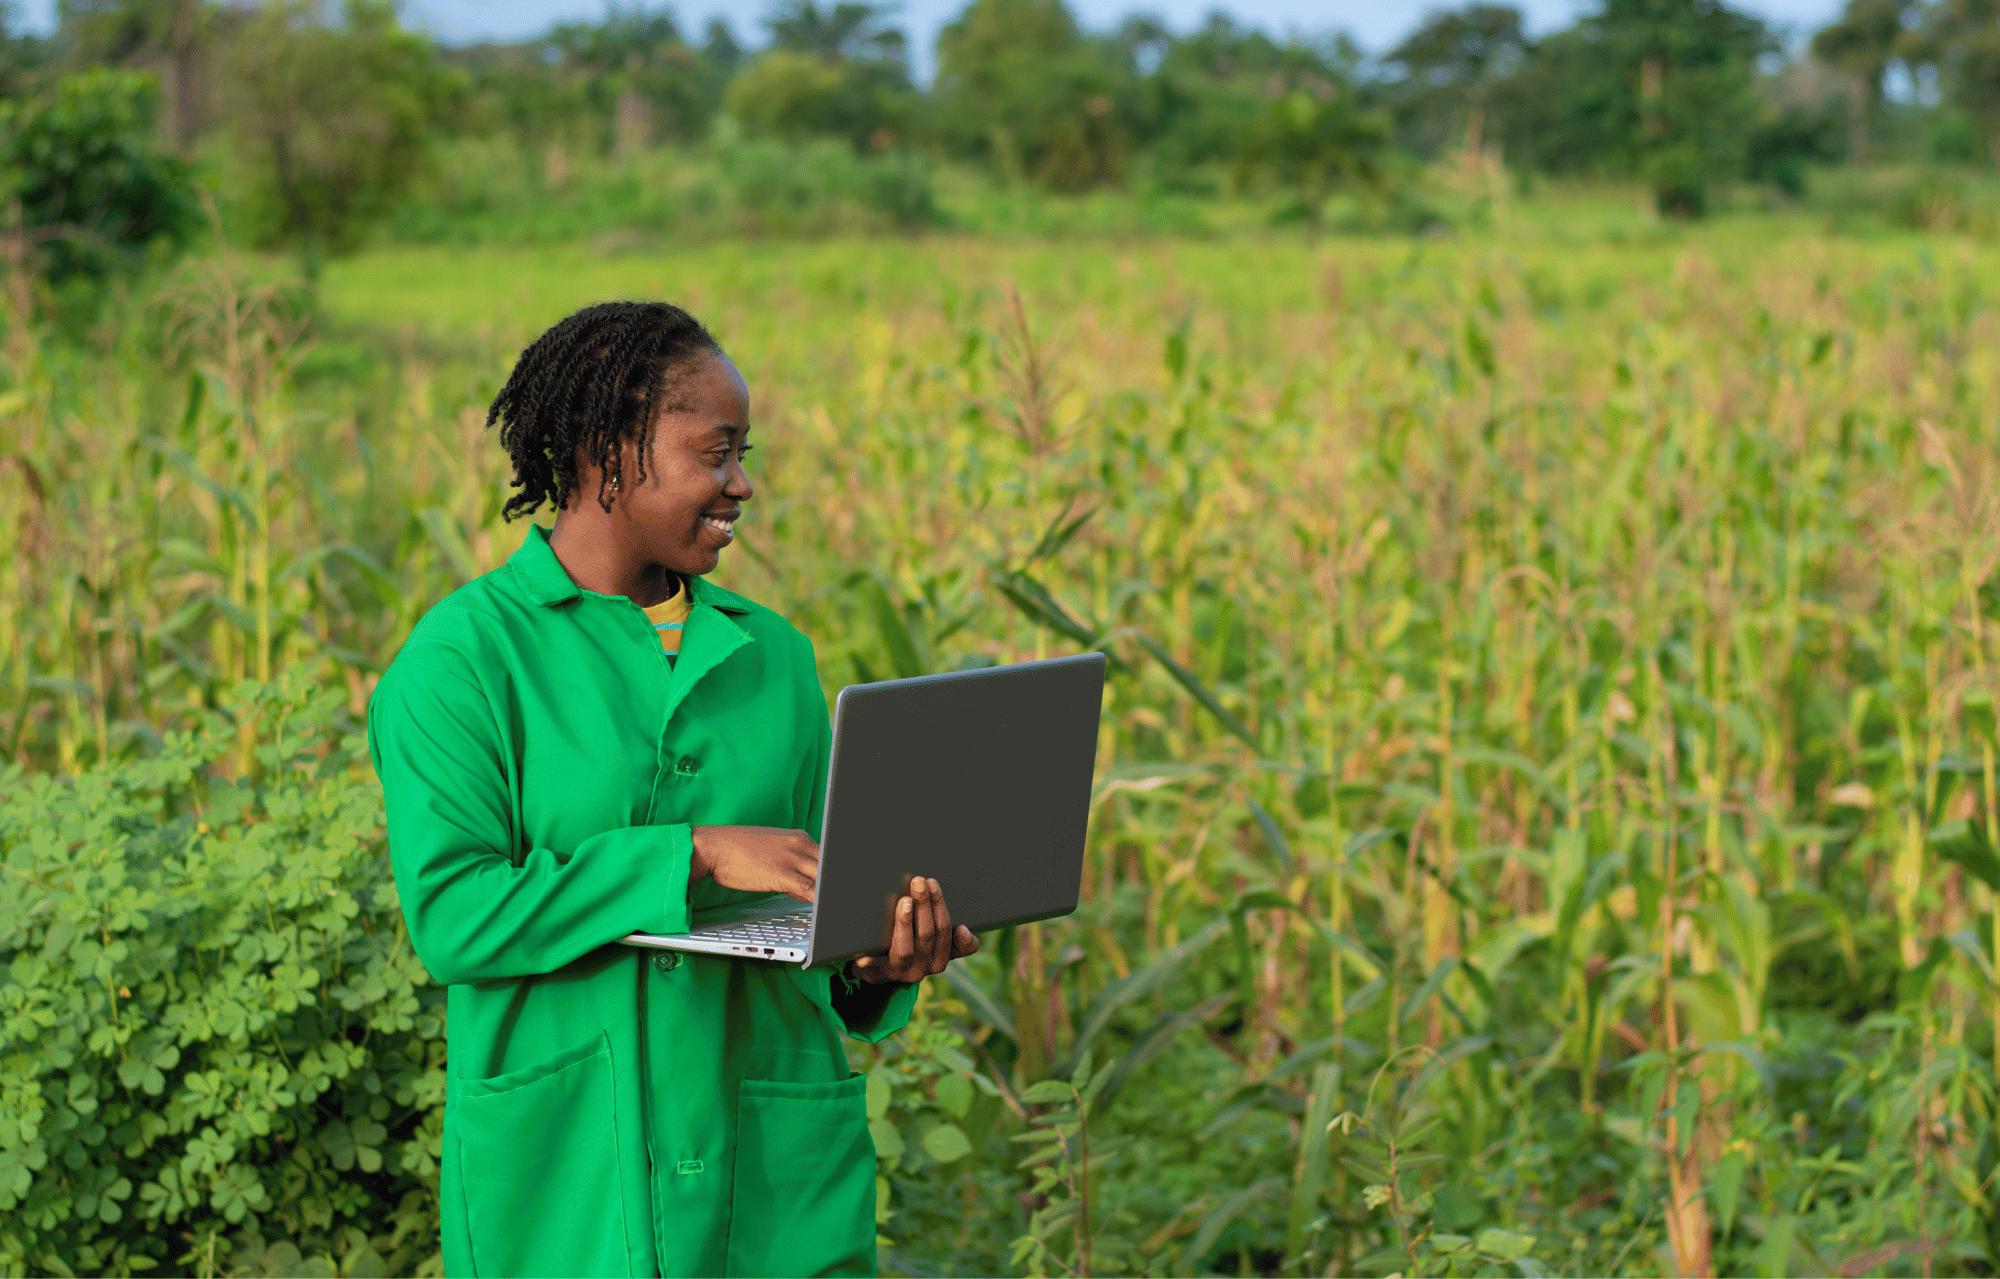 researcher-using-laptop-in-agriculture-field